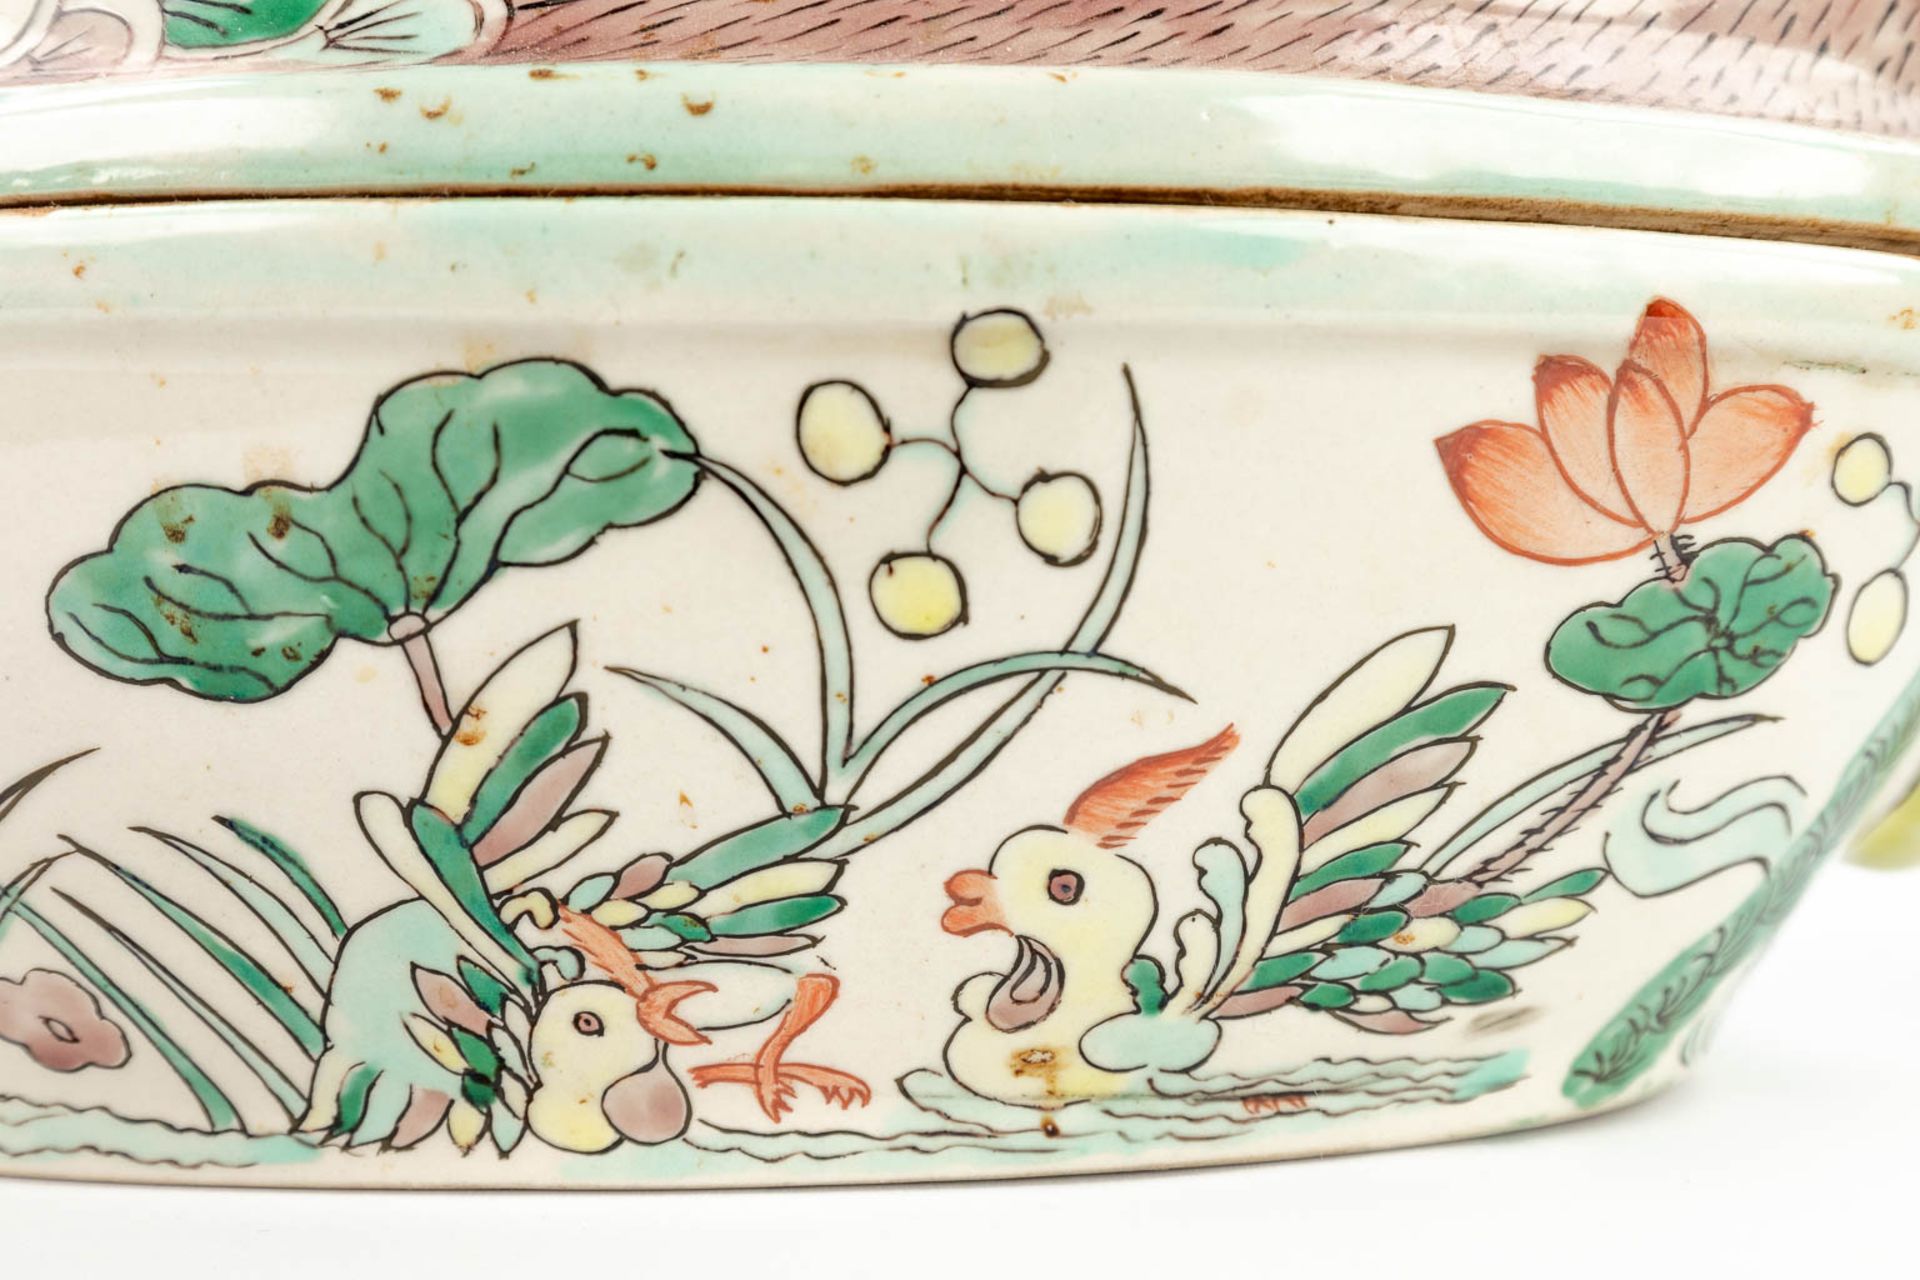 A figurative tureen in the shape of a duck, with hand-painted decor. (17 x 32 x 22cm) - Image 9 of 13